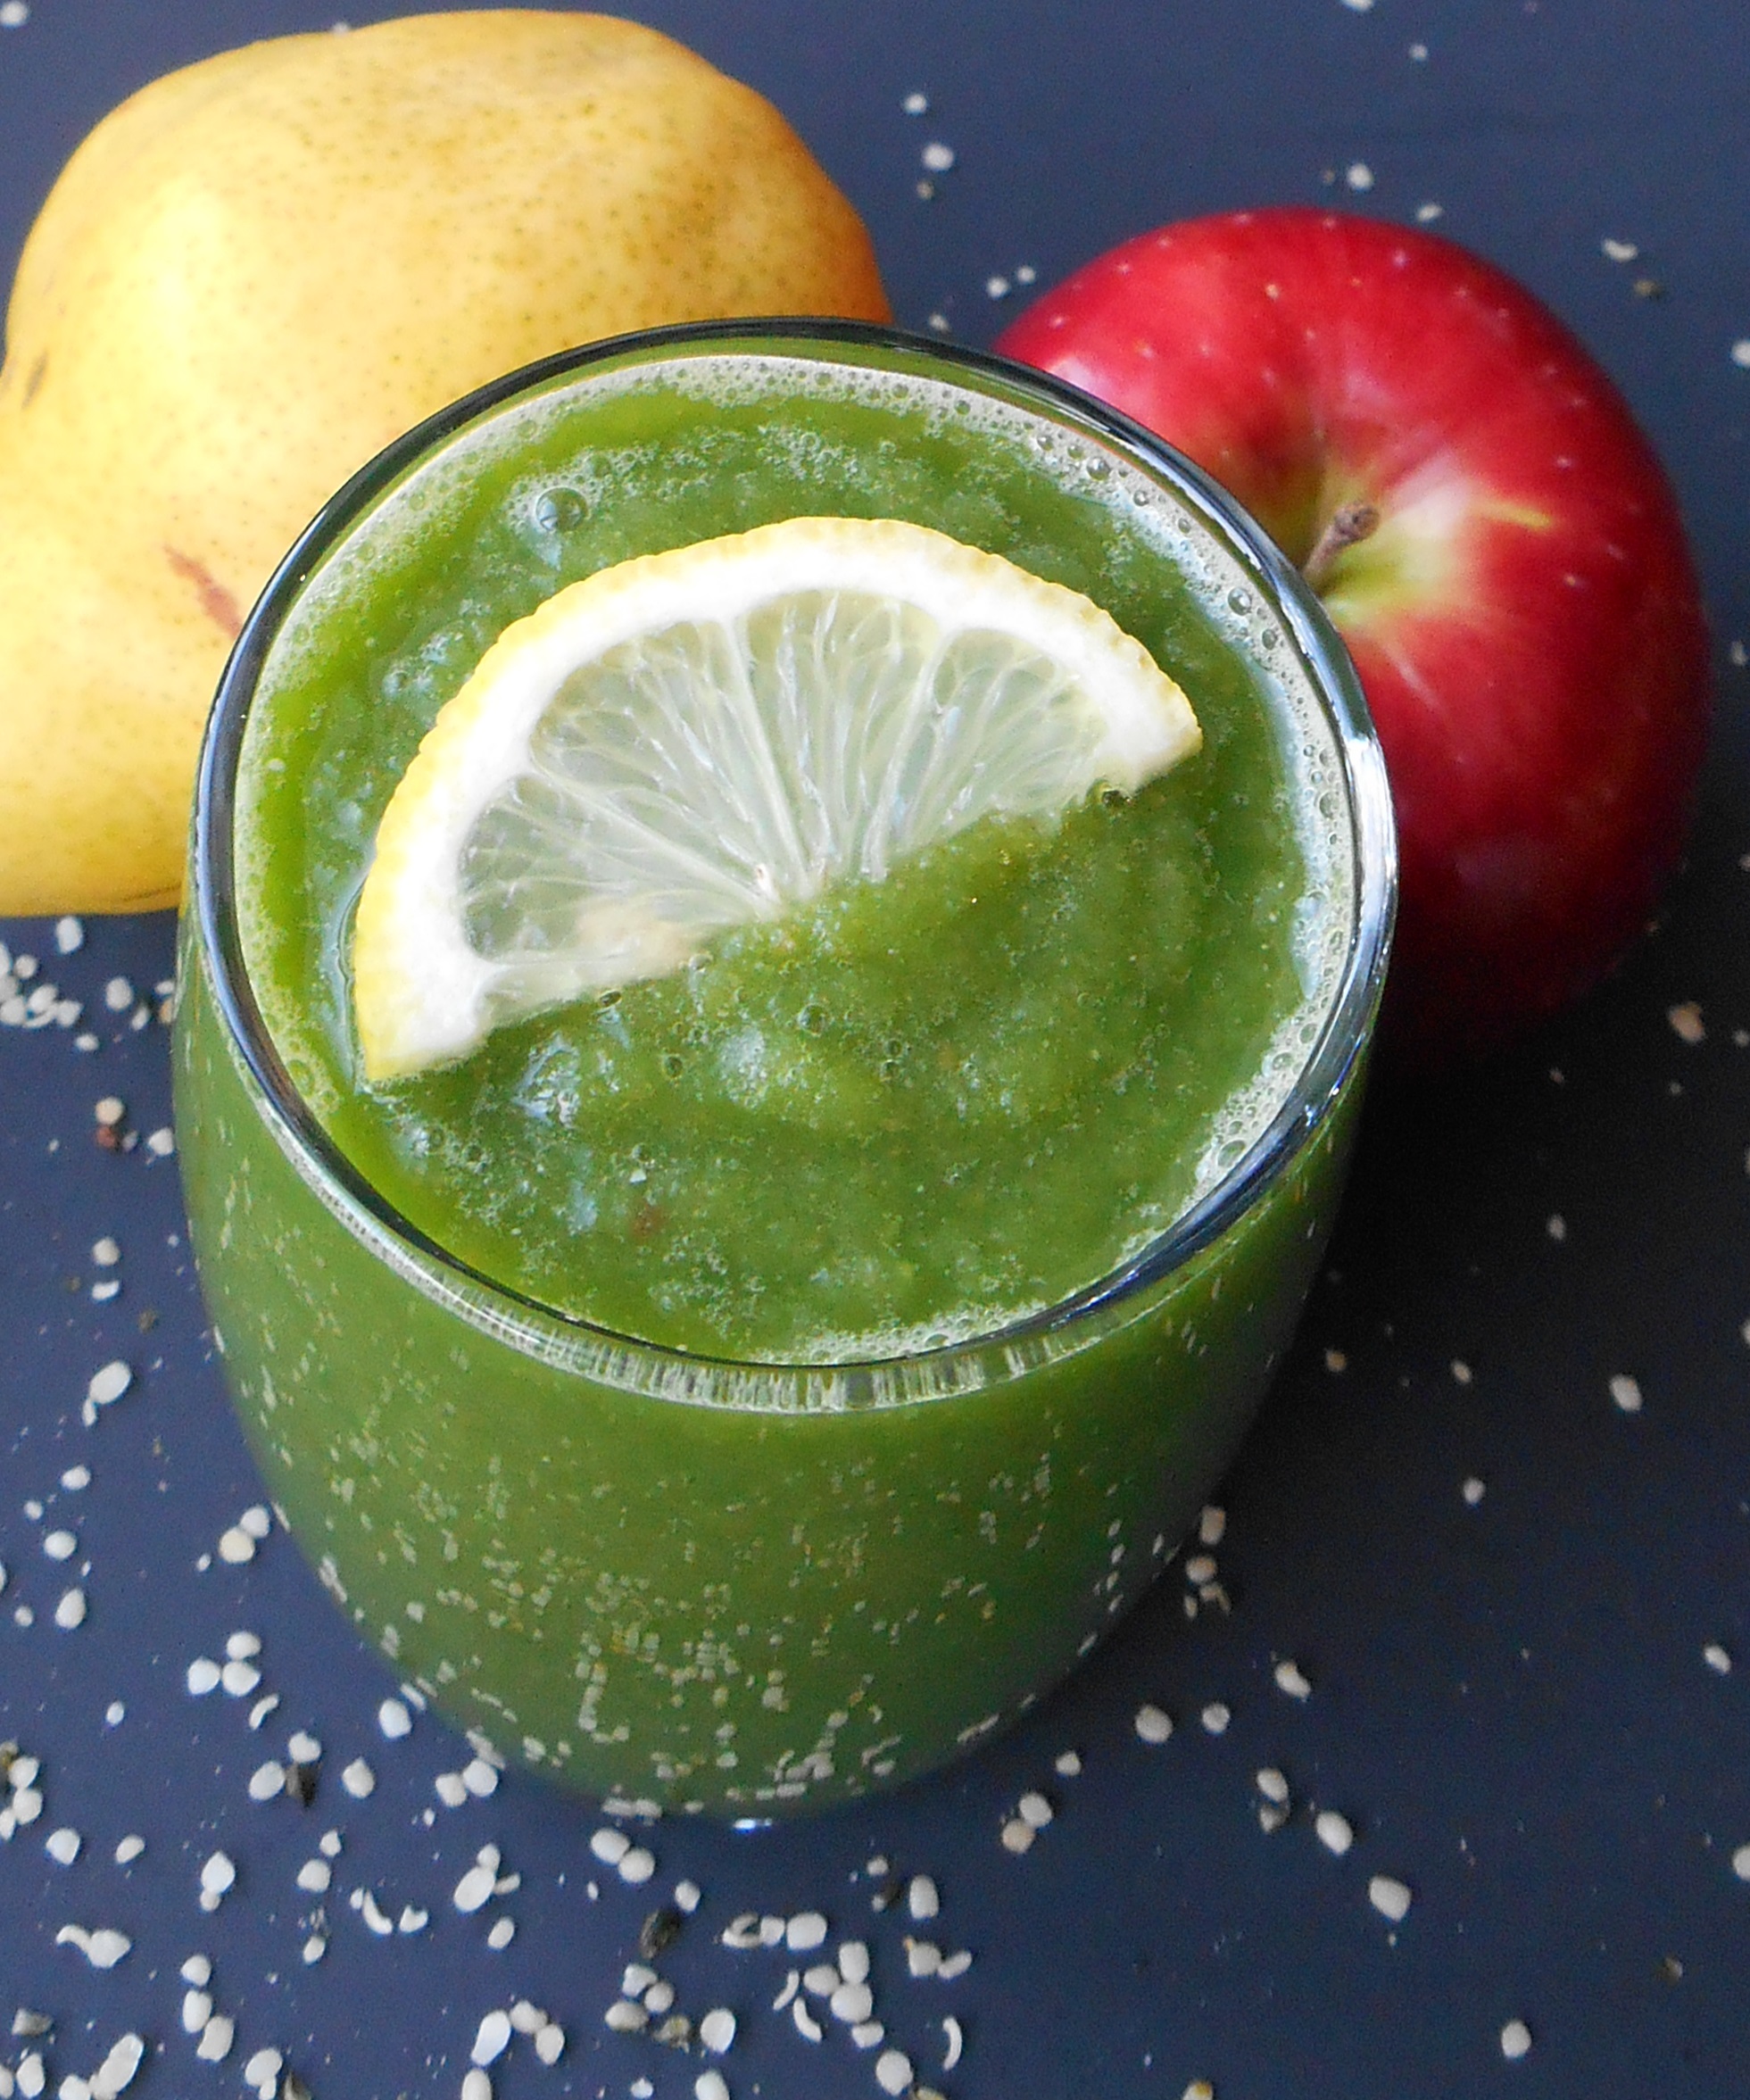 green smoothie with a slice of lemon on top